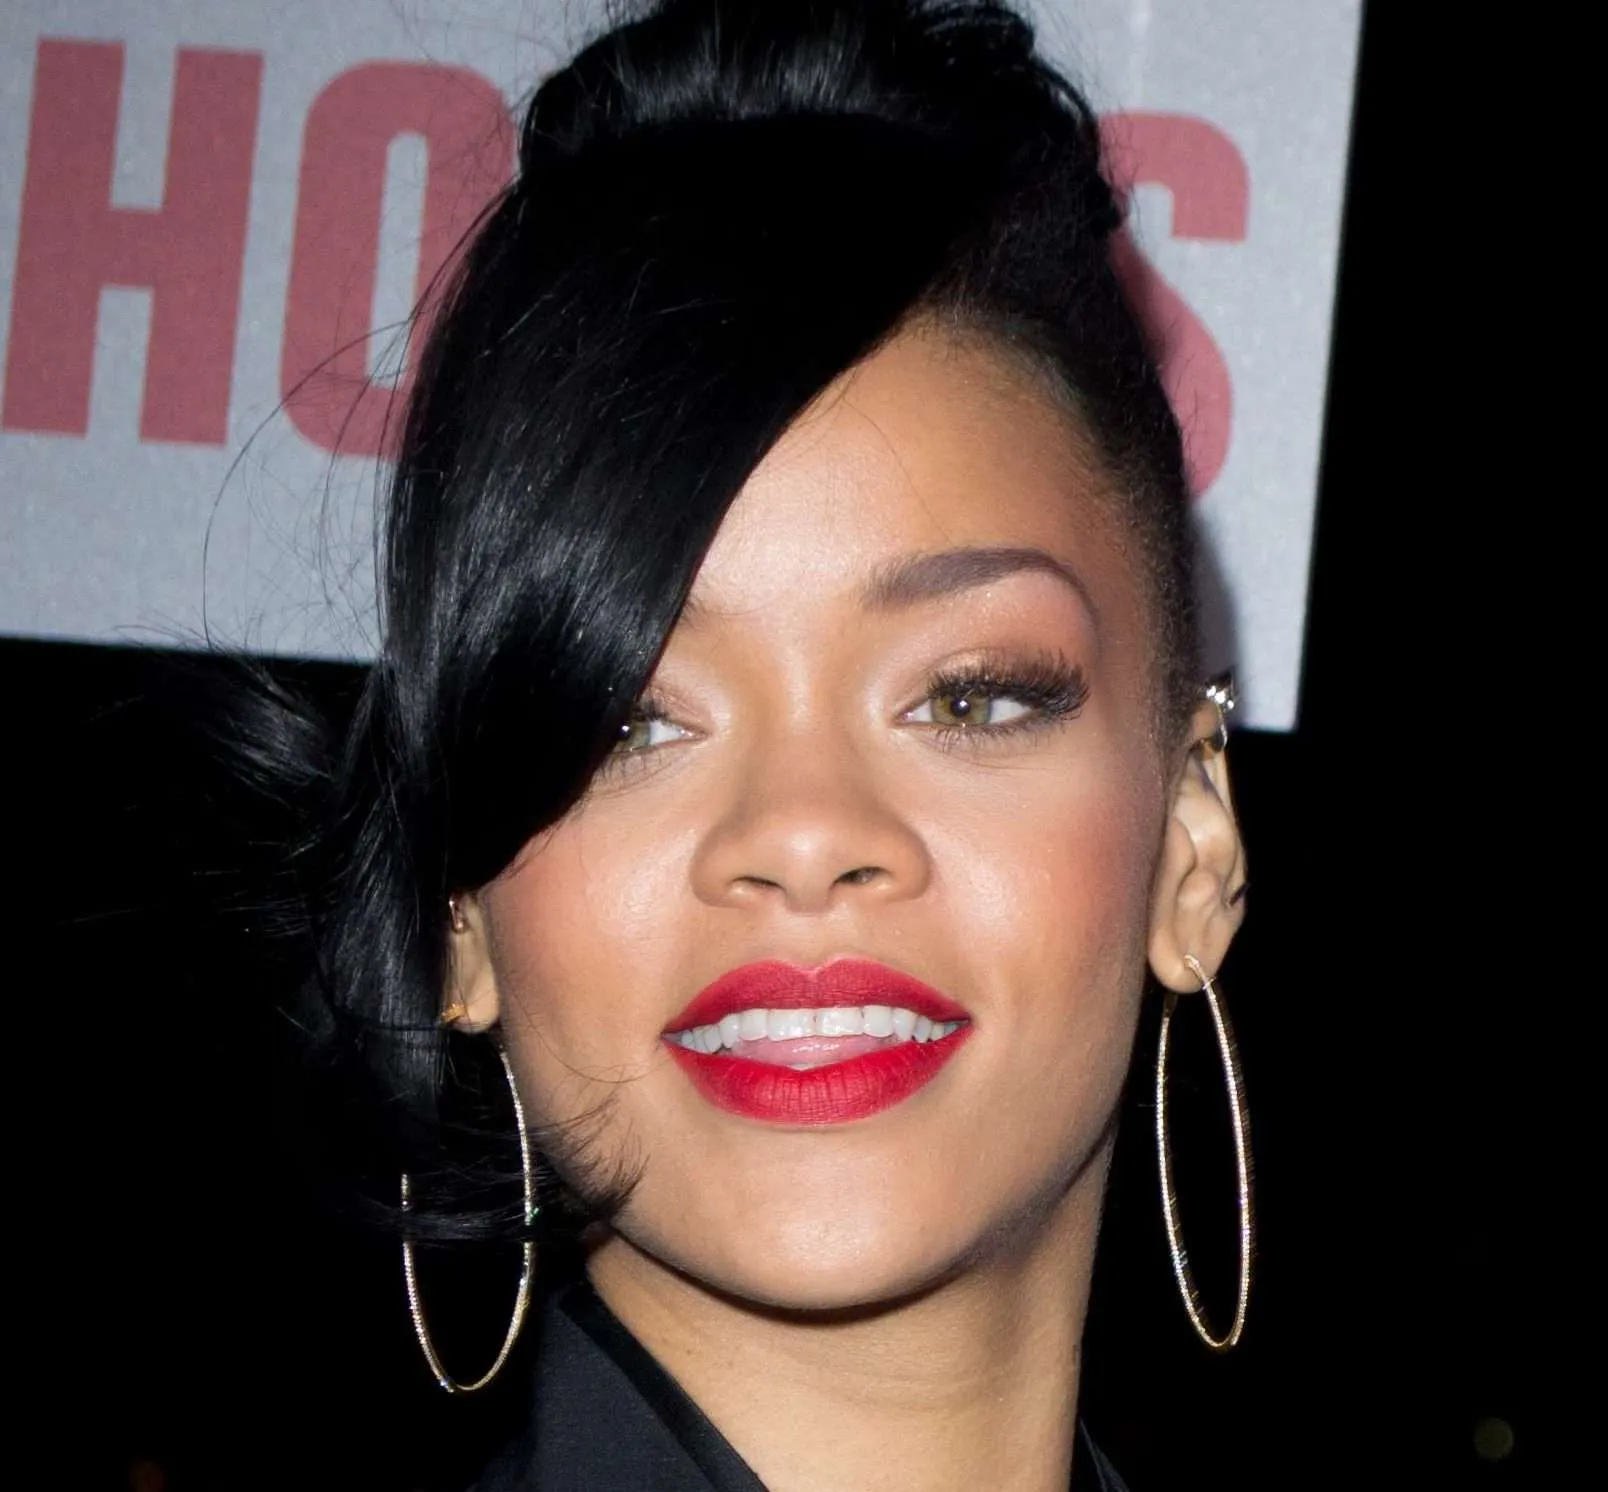 rihanna smiling with red lip stick